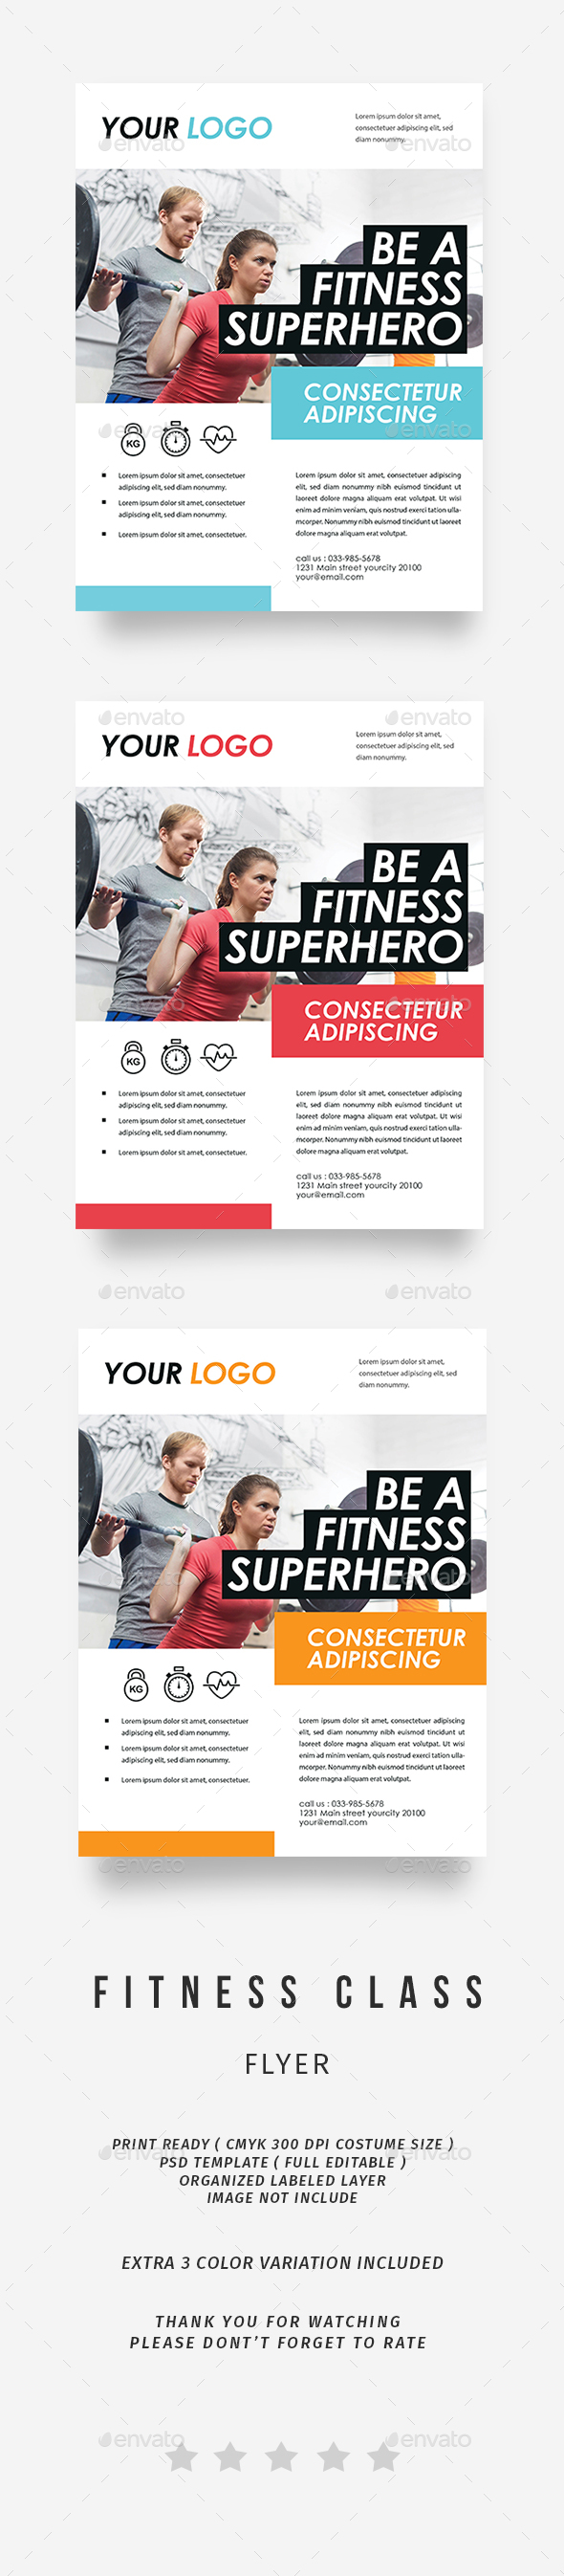 GraphicRiver Fitness Flyer 20503146